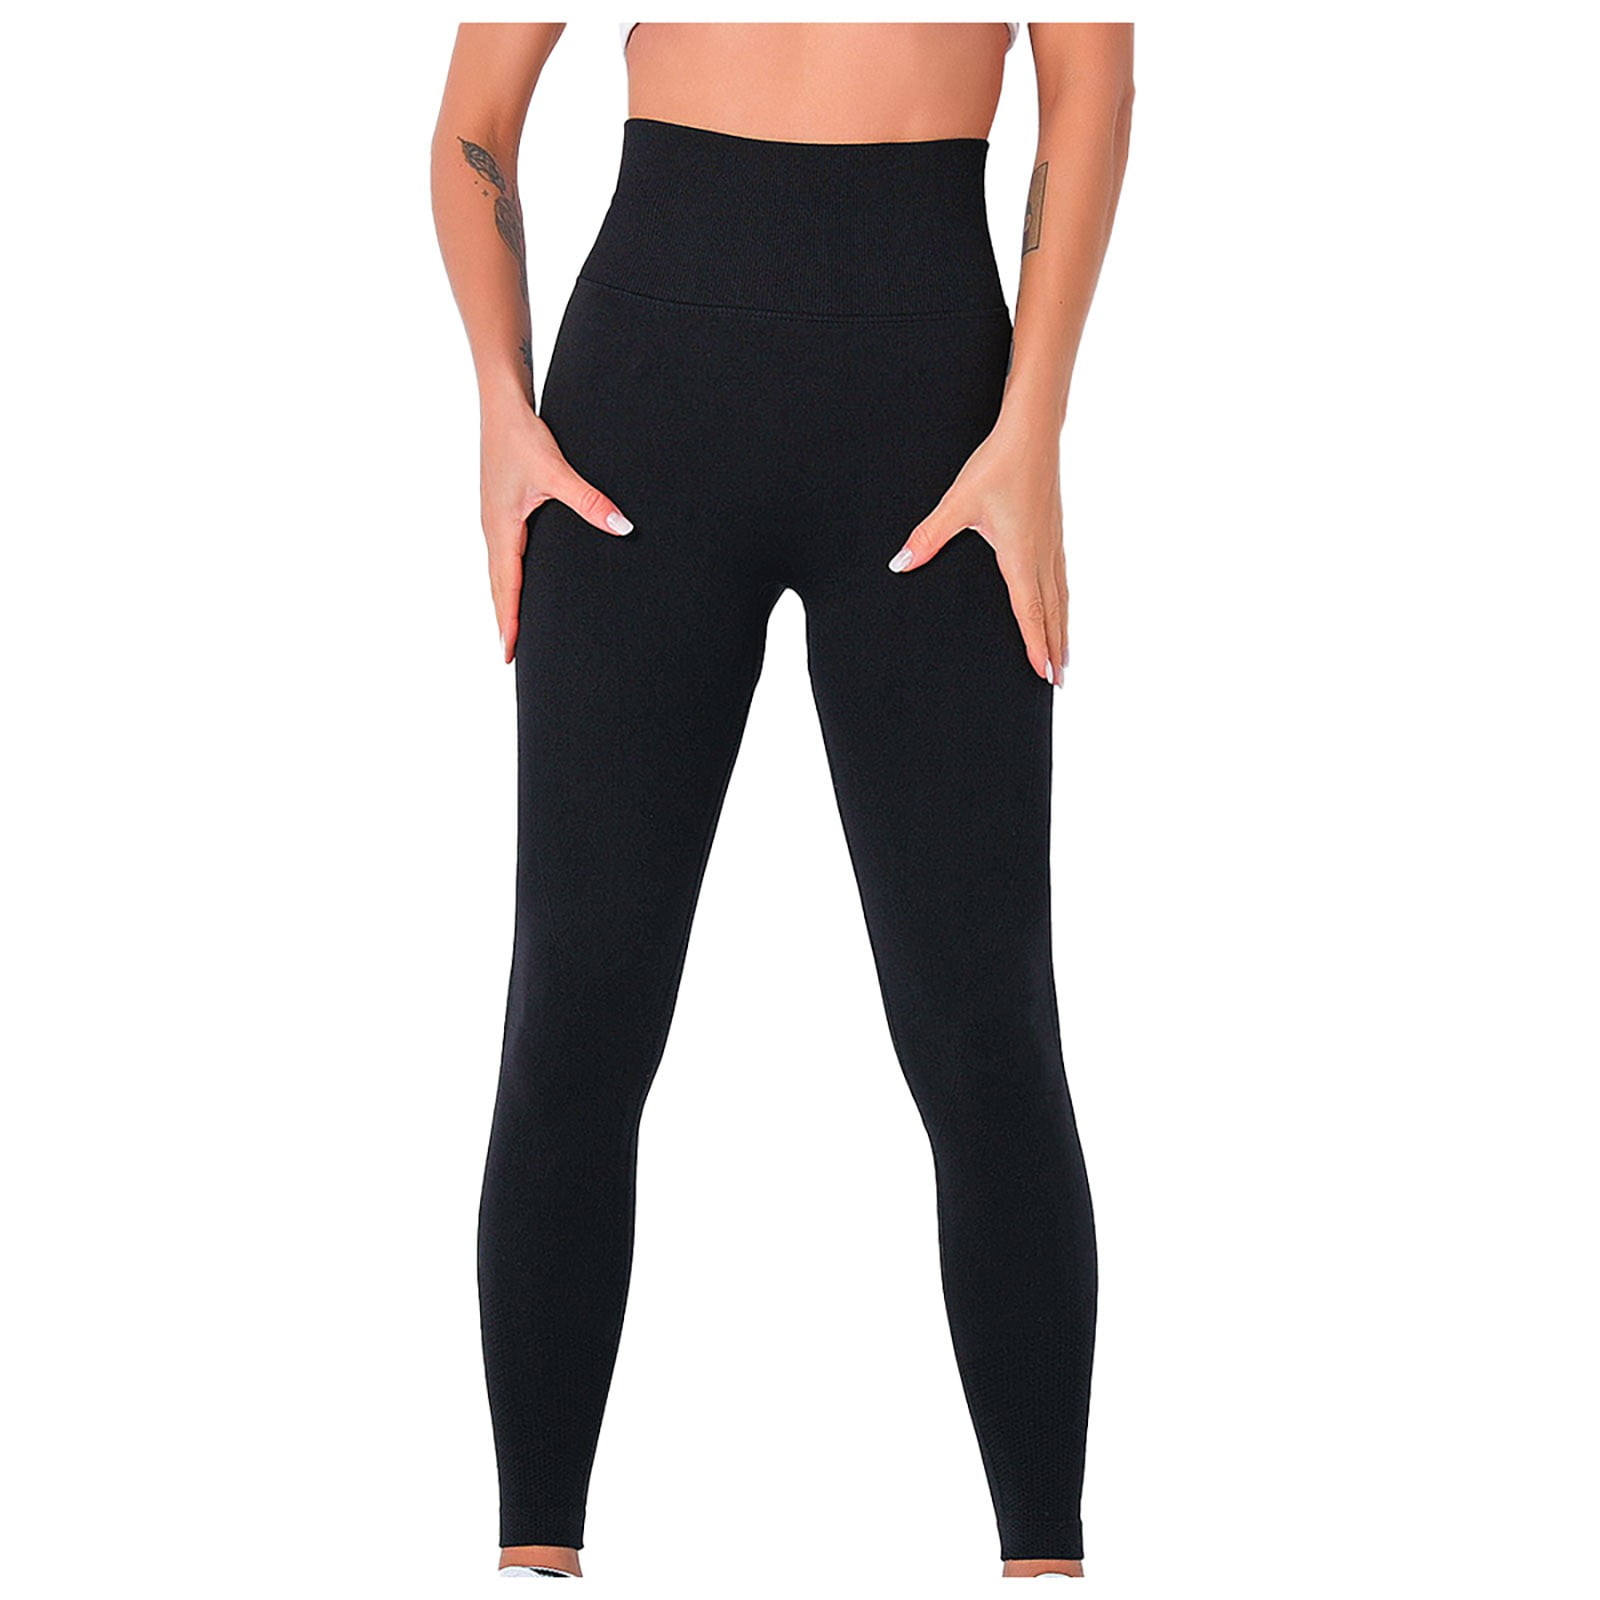  AITEQY Womens Crossover Flare Yoga Pants Petite High